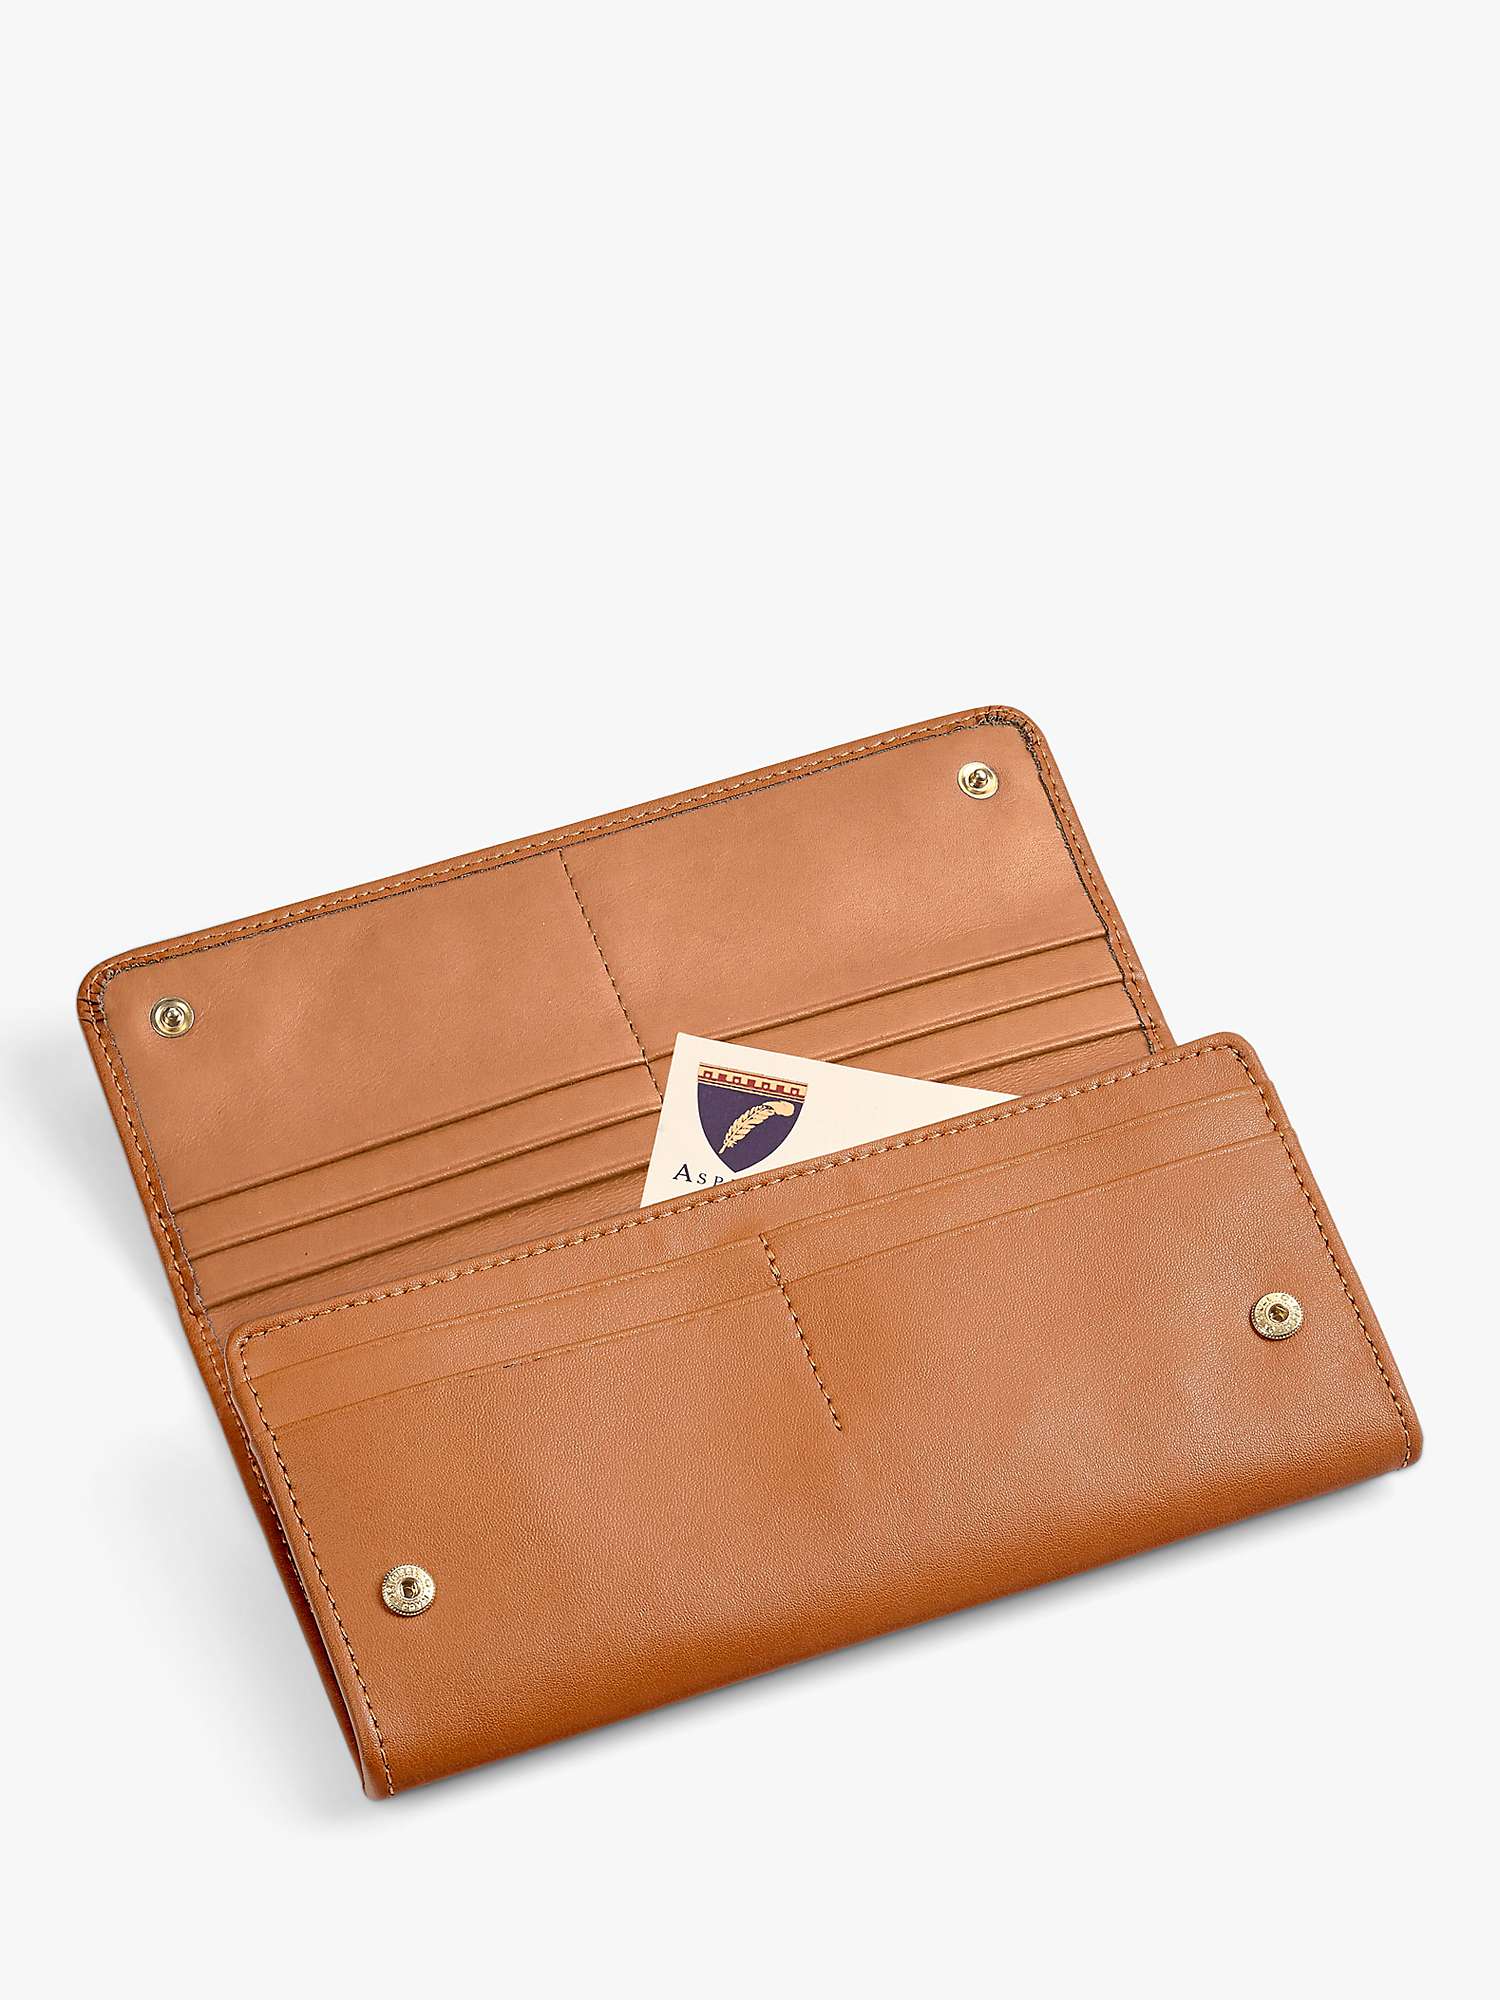 Buy Aspinal of London Lottie Smooth Leather Purse, Tan Online at johnlewis.com